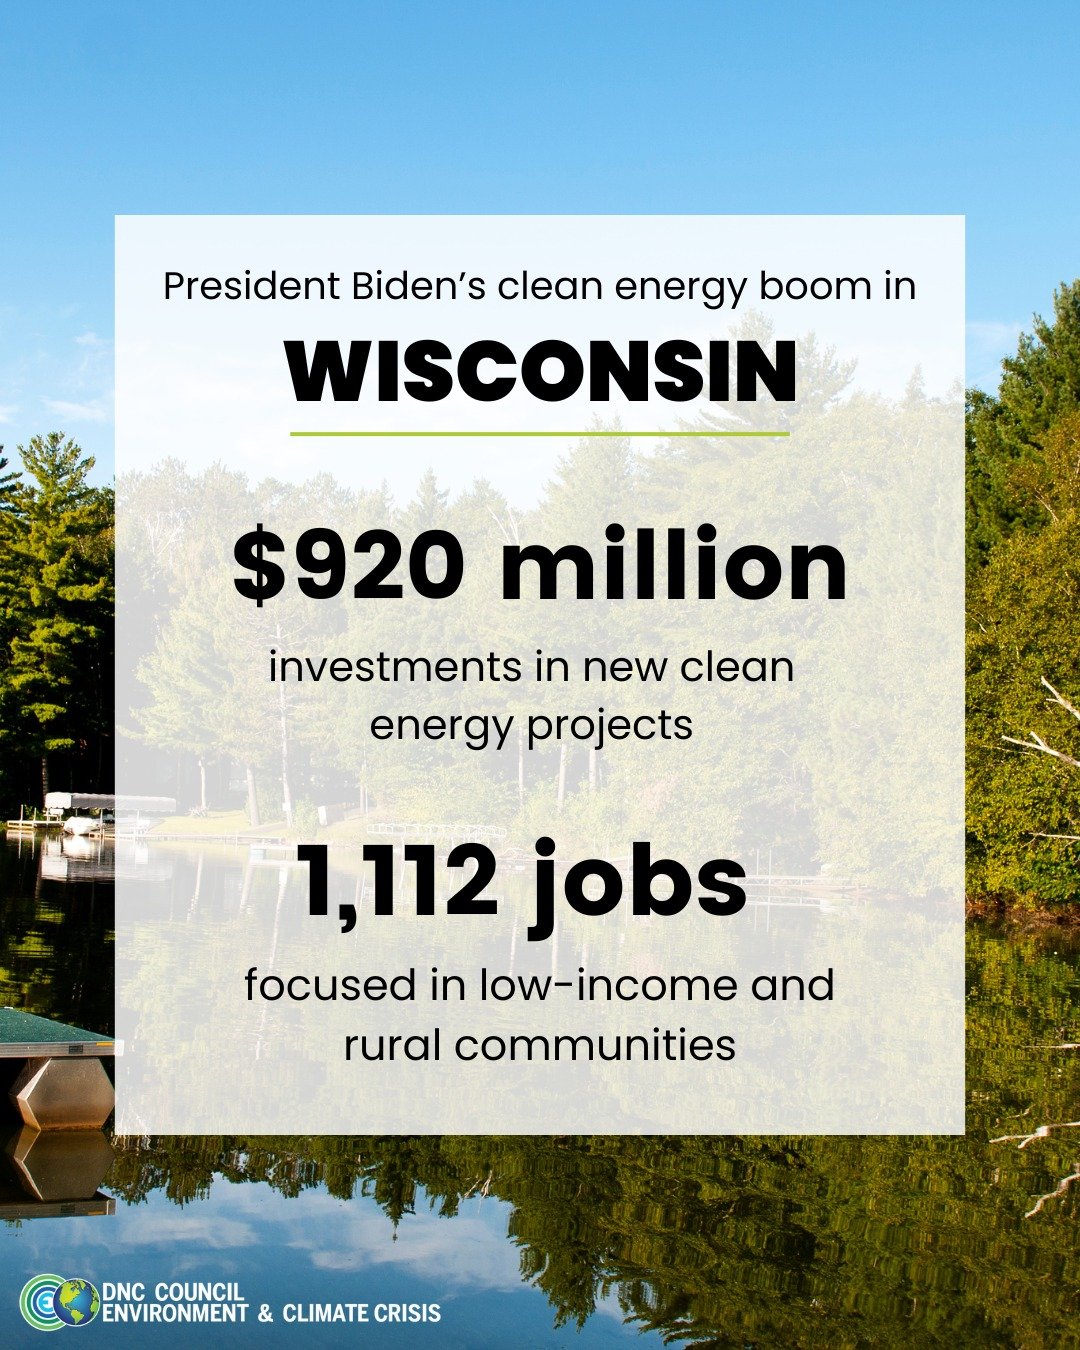 President Biden is leading the clean energy transition, and states are seeing the benefits!⚡

Wisconsin: $920 million in new clean energy project investments and 1,112 jobs &mdash; and counting. A just transition helps us all thrive &ndash; people, c